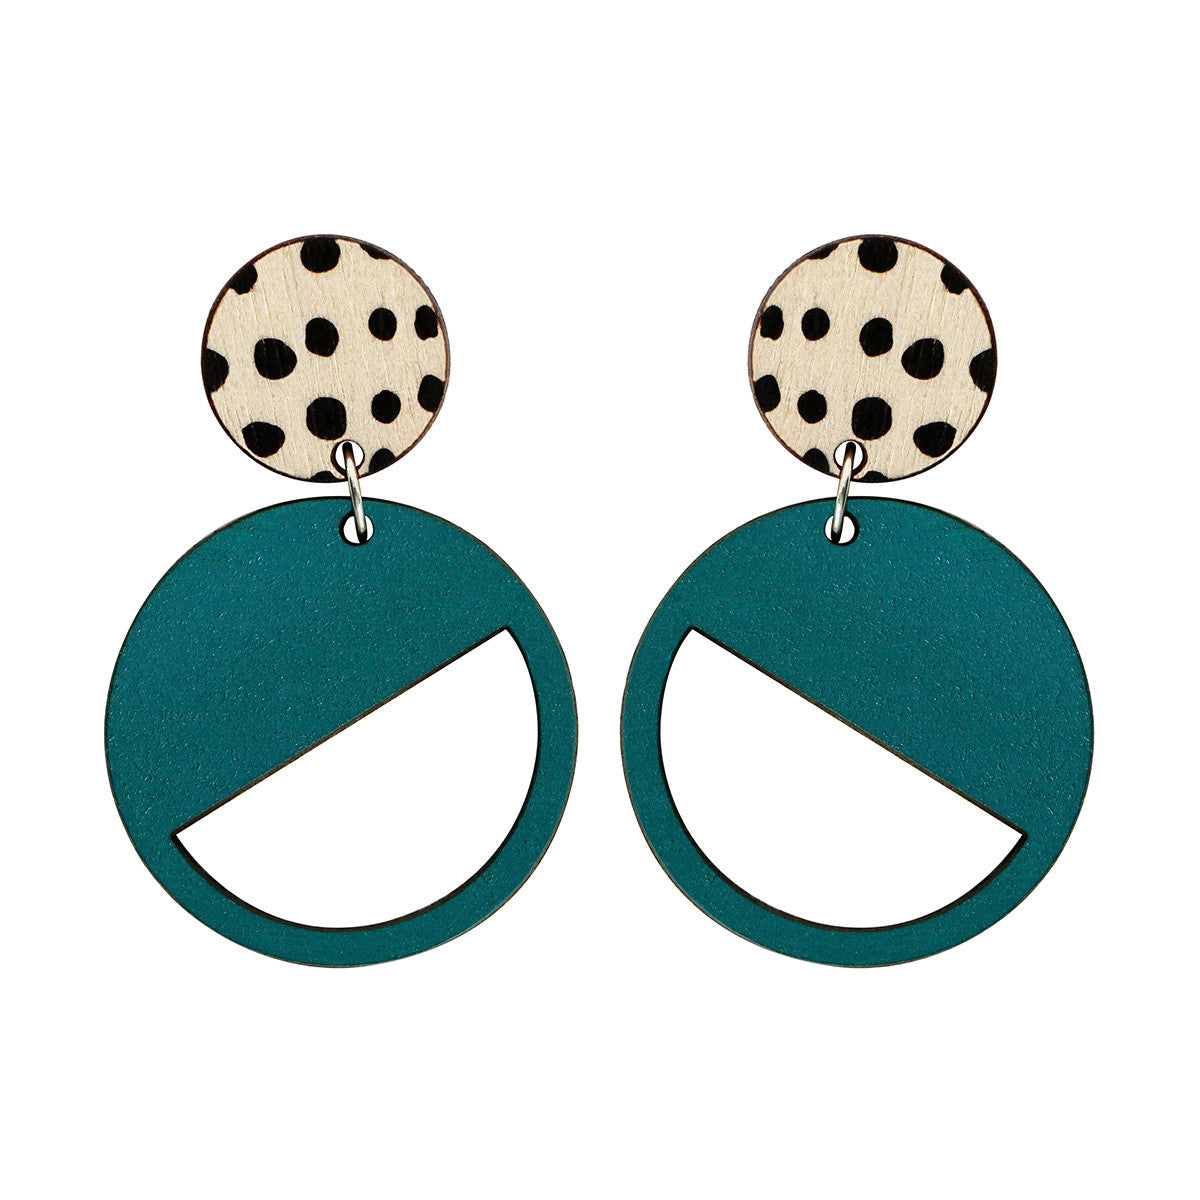 2 tiered earrings with spots in green